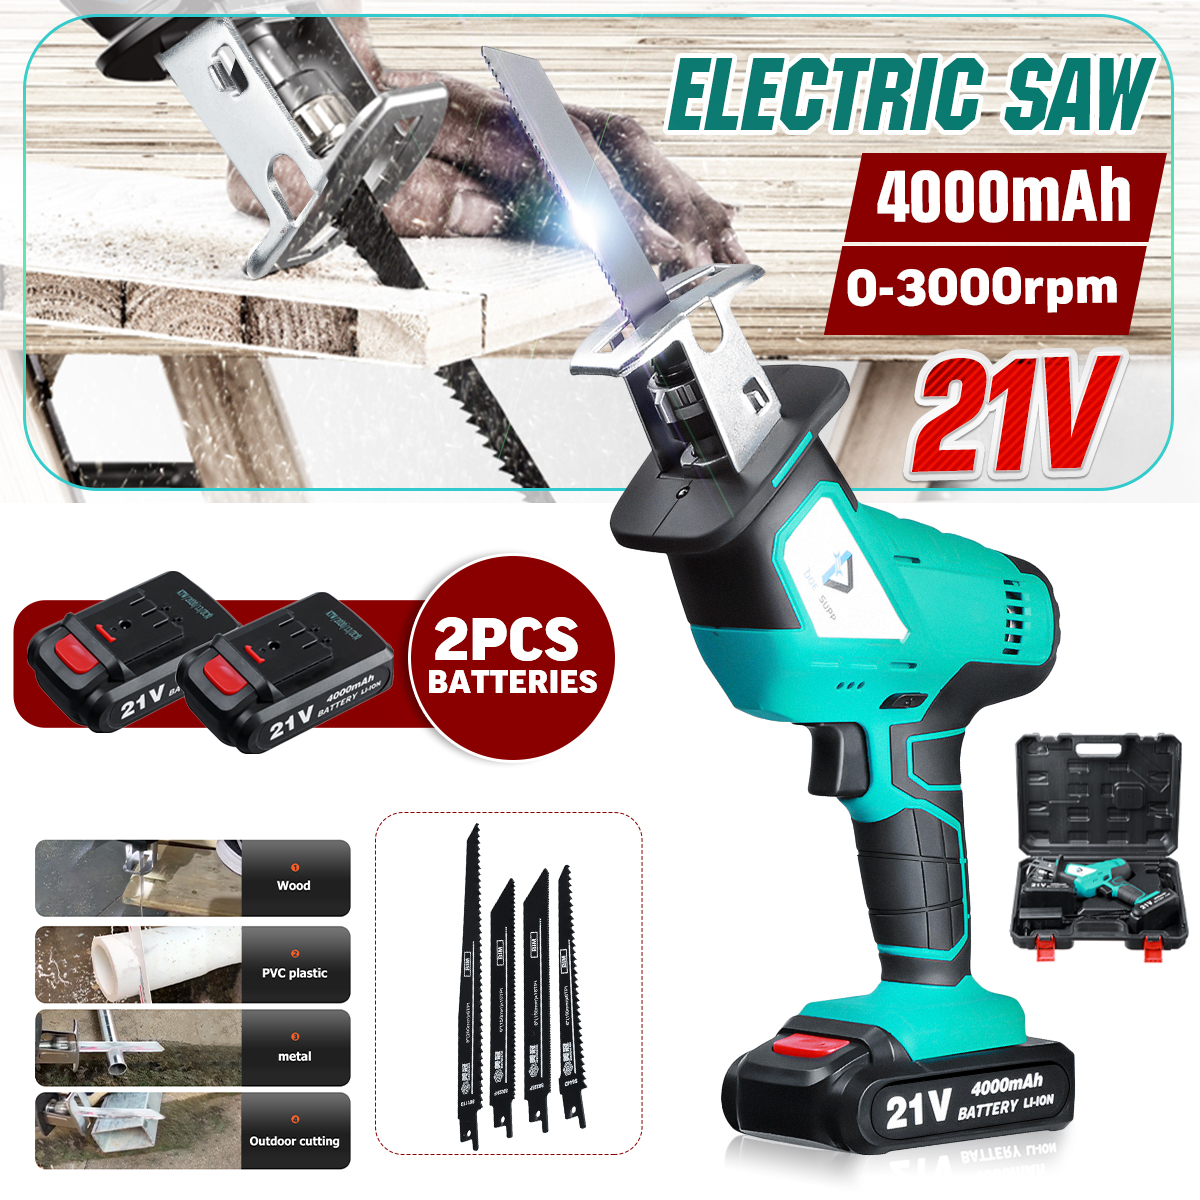 21V-3000RPM-Electric-Cordless-Reciprocating-Saw-For-Wood-Metal-Cutting-With-Battery-1805607-1